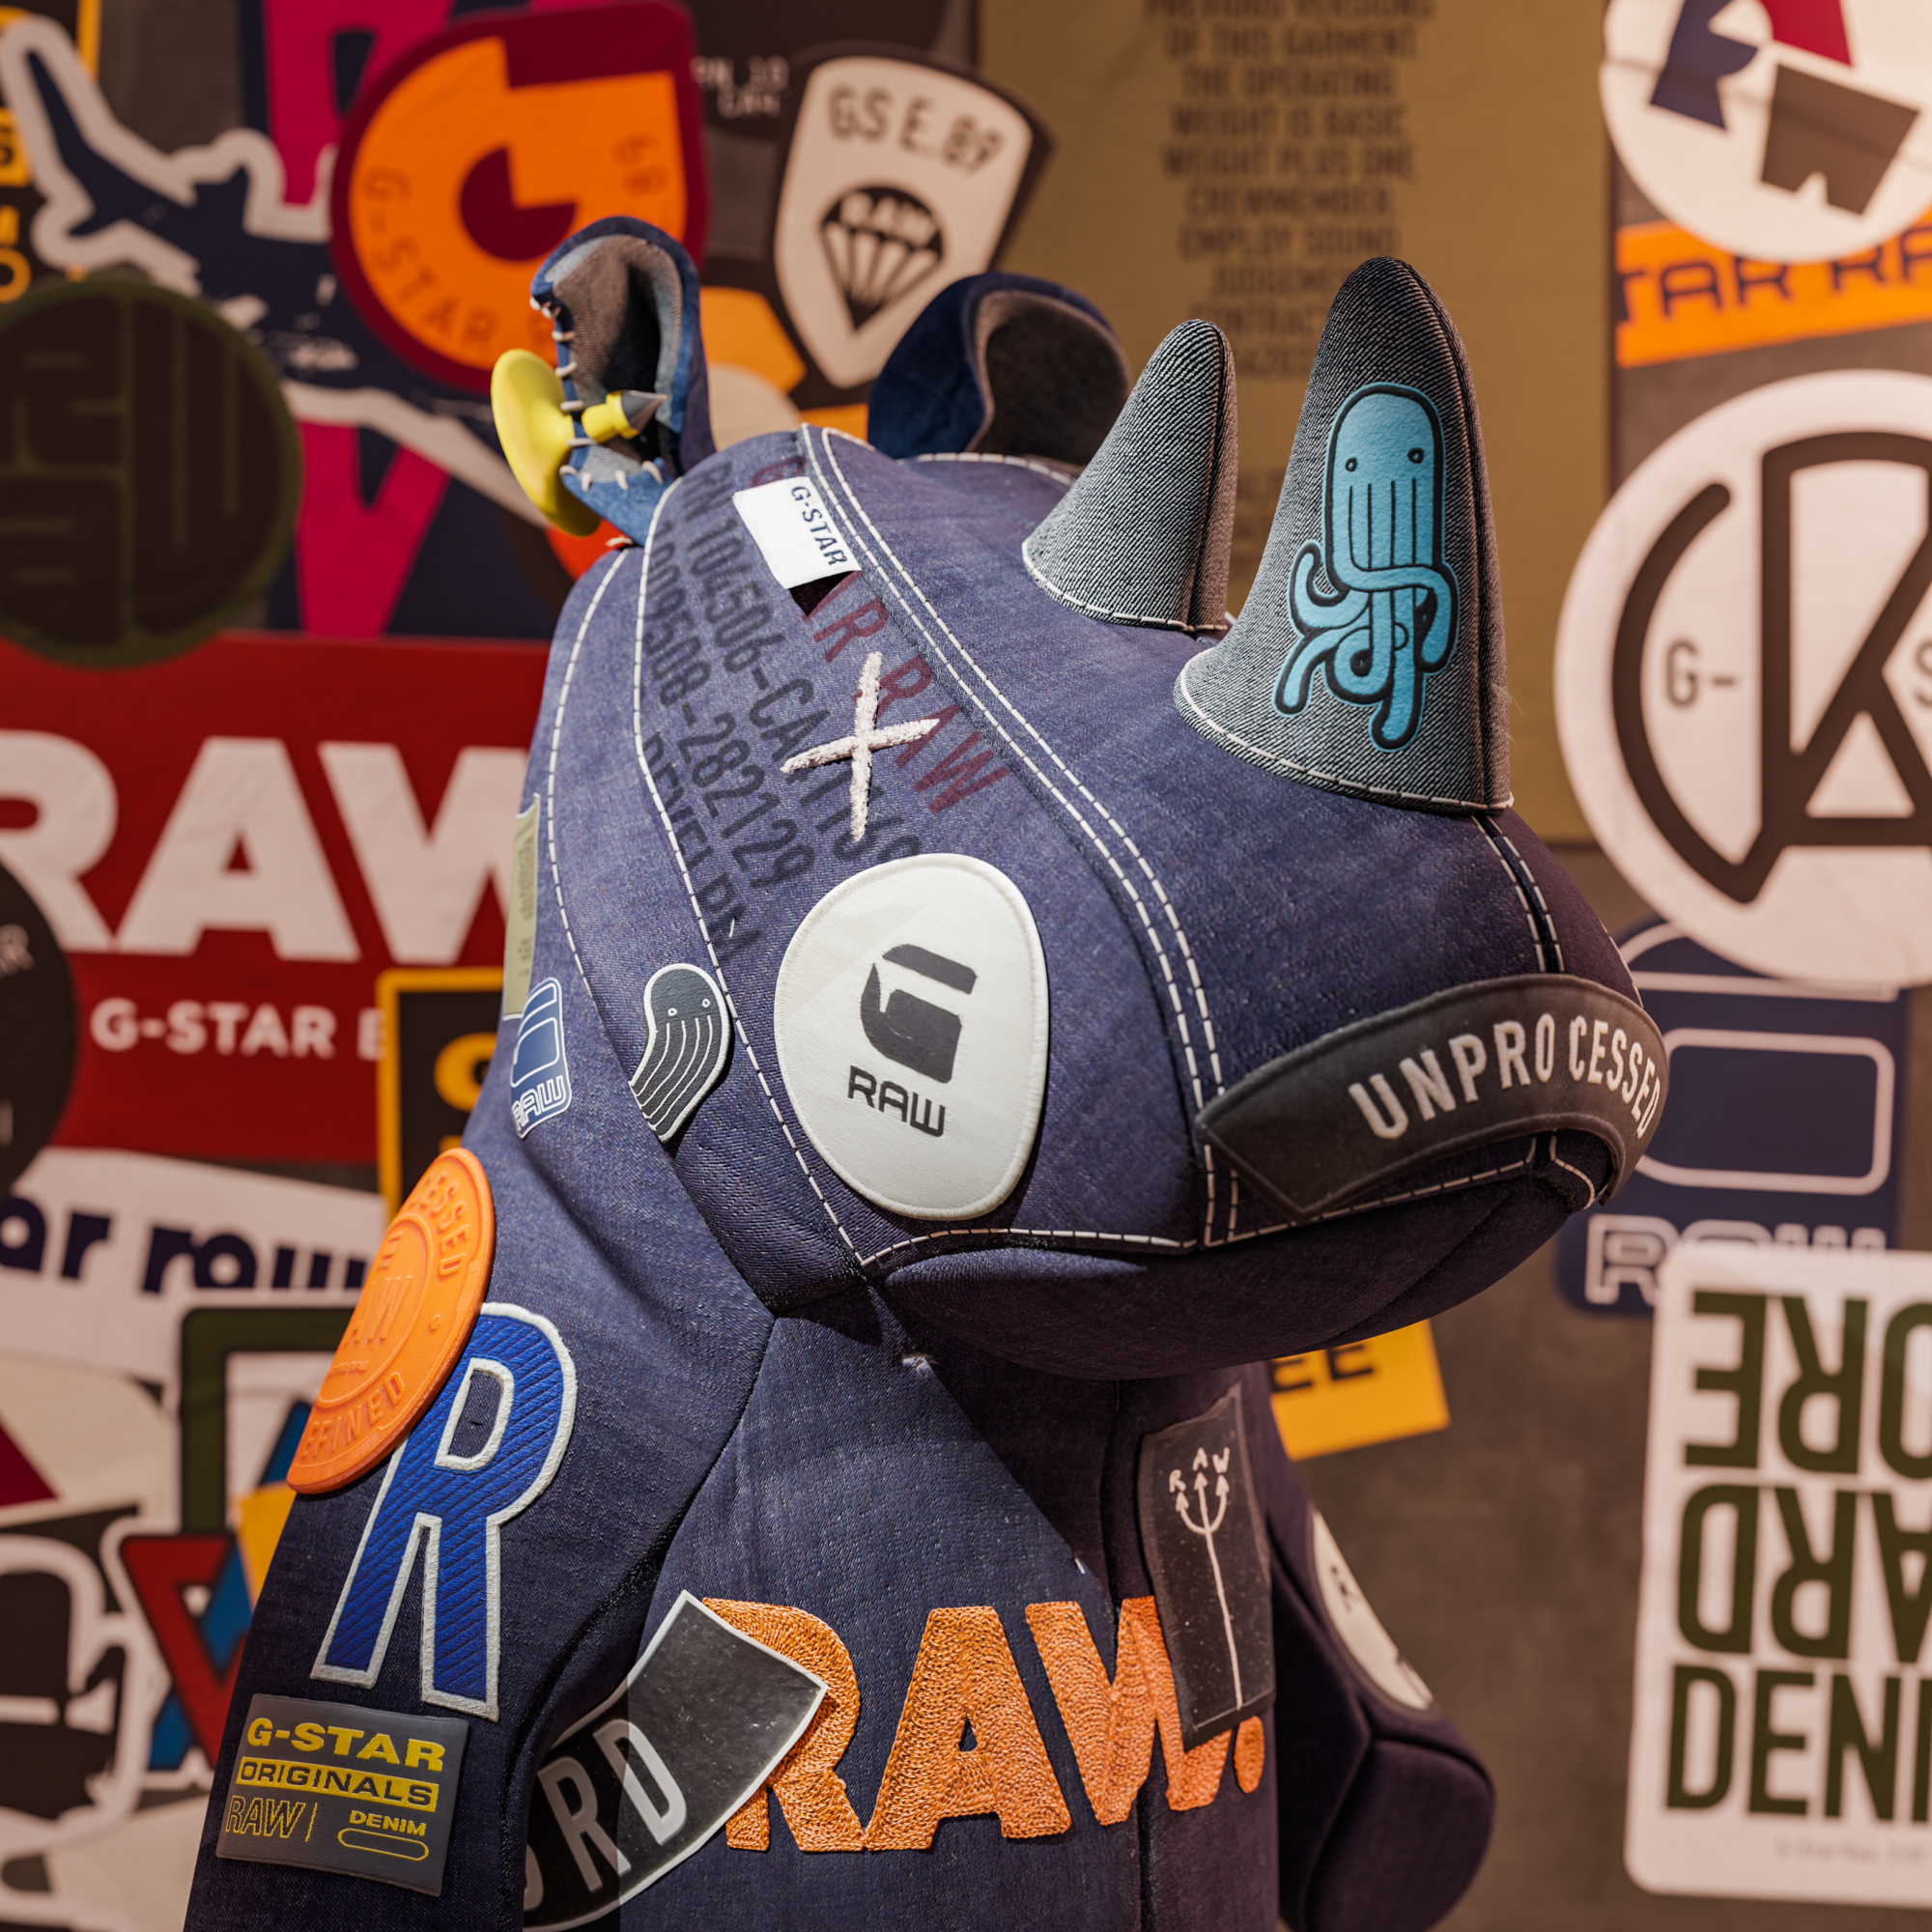 G-Star RAW NFT rhino figure covered in patches.